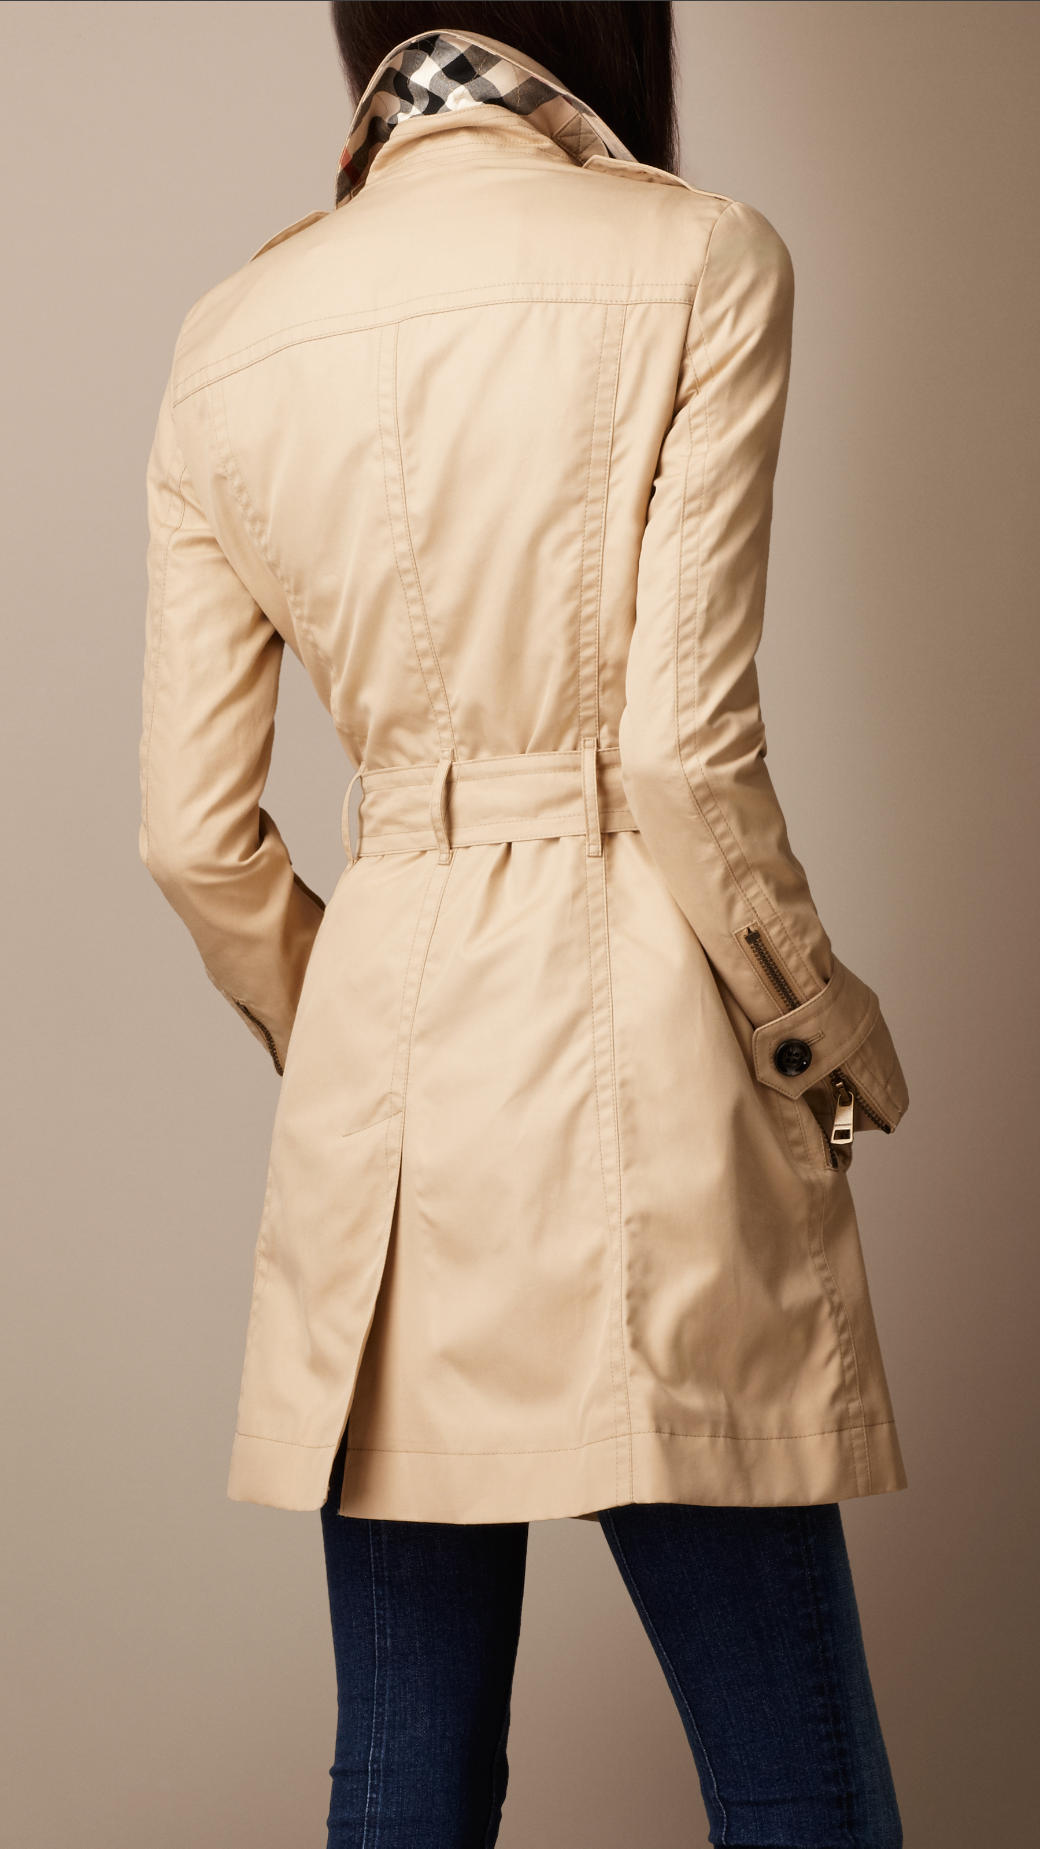 Lyst - Burberry brit Double Throat Latch Trench Coat in Natural